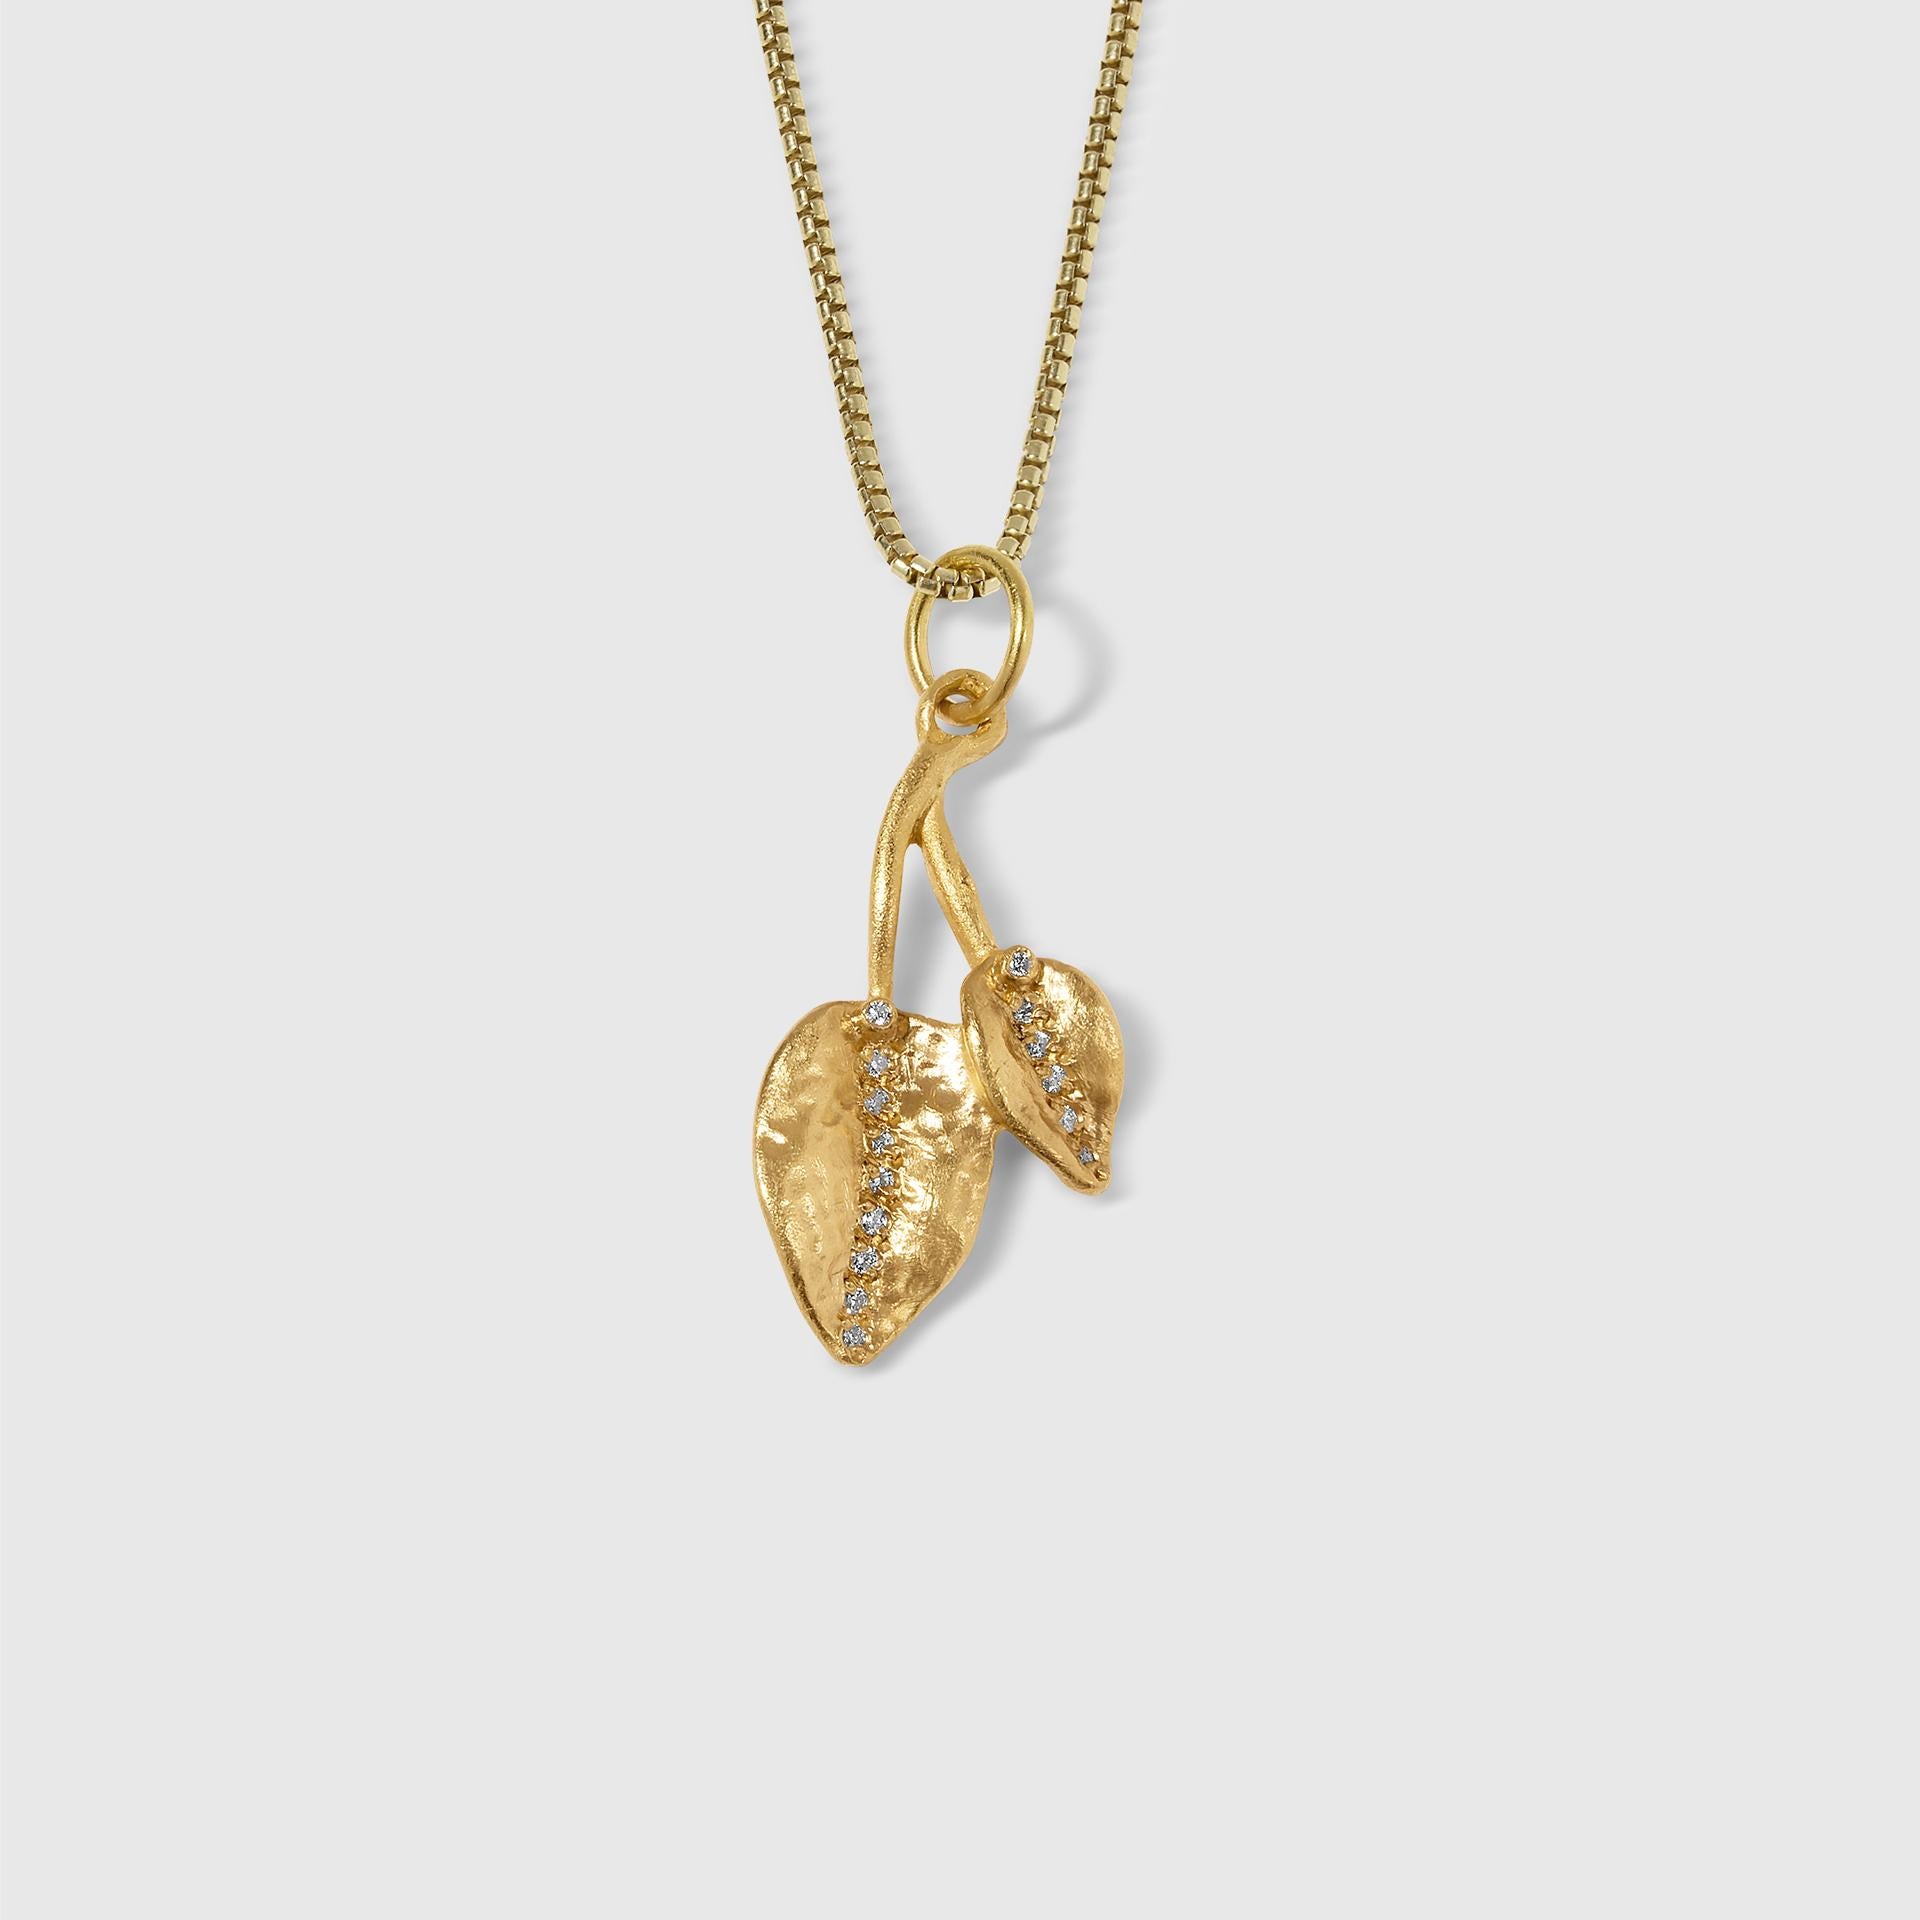 Round Cut Greek Leaves, Double Leaf Charm Pendant Necklace with Diamonds, 24kt Solid Gold For Sale